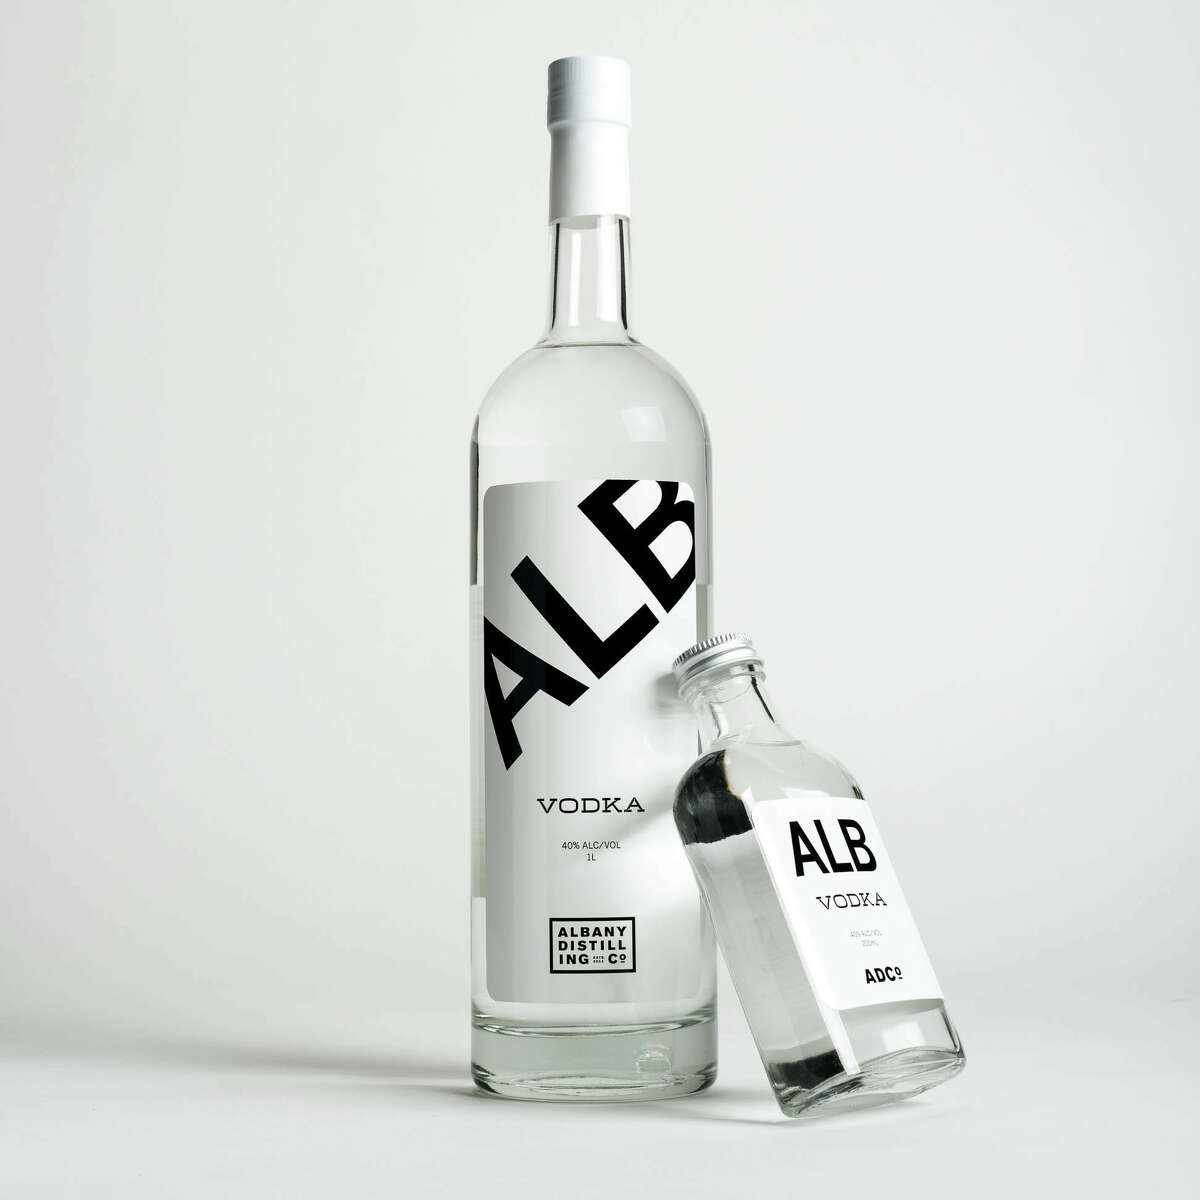 ALB Vodka, made by Albany-based Albany Distilling Co., is expanding rapidly in popularity and will be the featured vodka in Yankee Stadium bars this season.